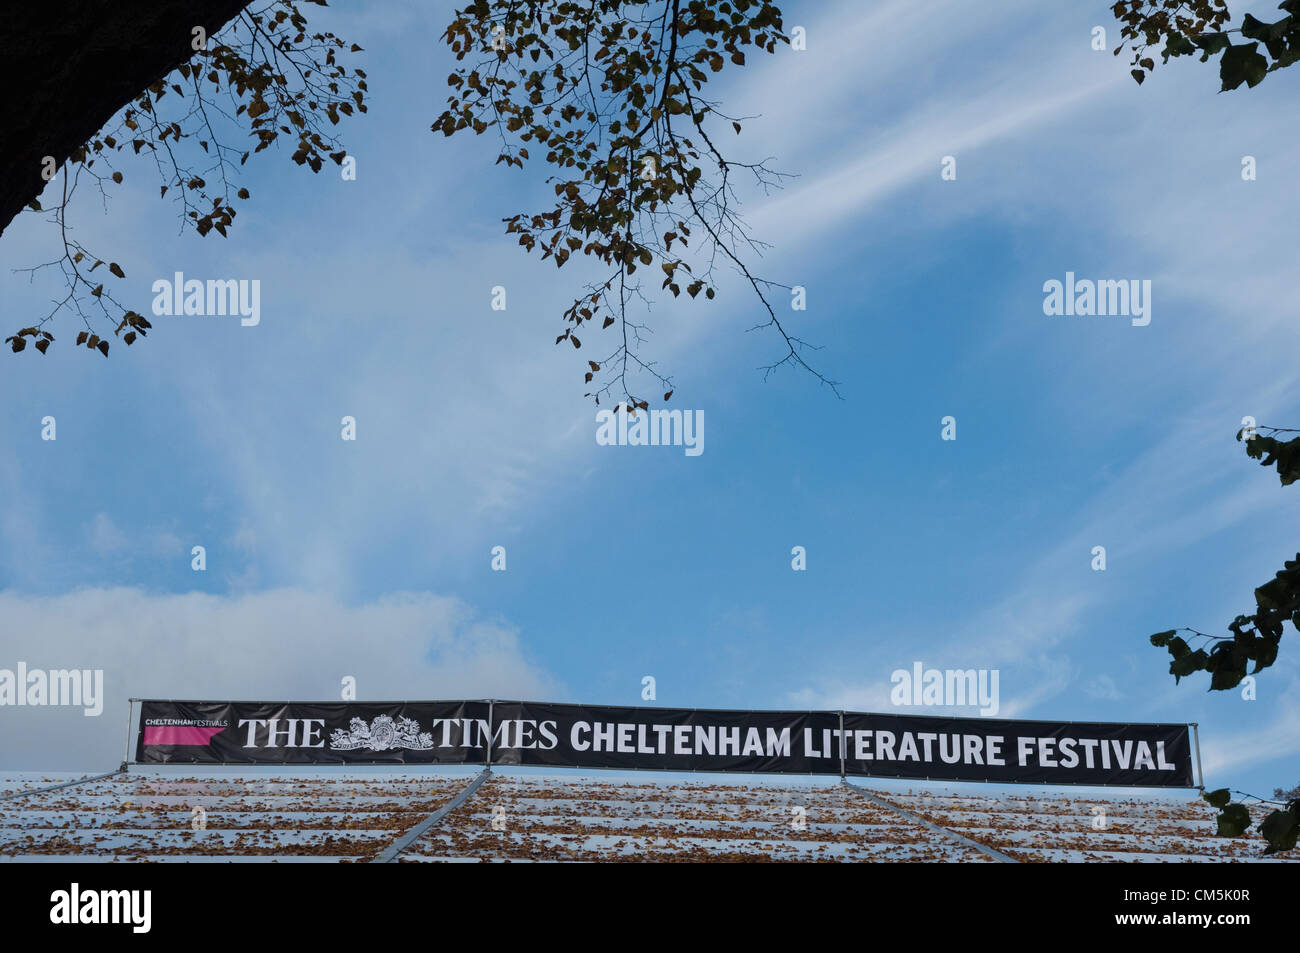 Cheltenham, UK. 9th October 2012. A banner on top of a tent covered in Autumn leaves advertising The Cheltenham Literature Festival sponsored by The Times newspapers which takes place 5th - 14th October 2012. Stock Photo